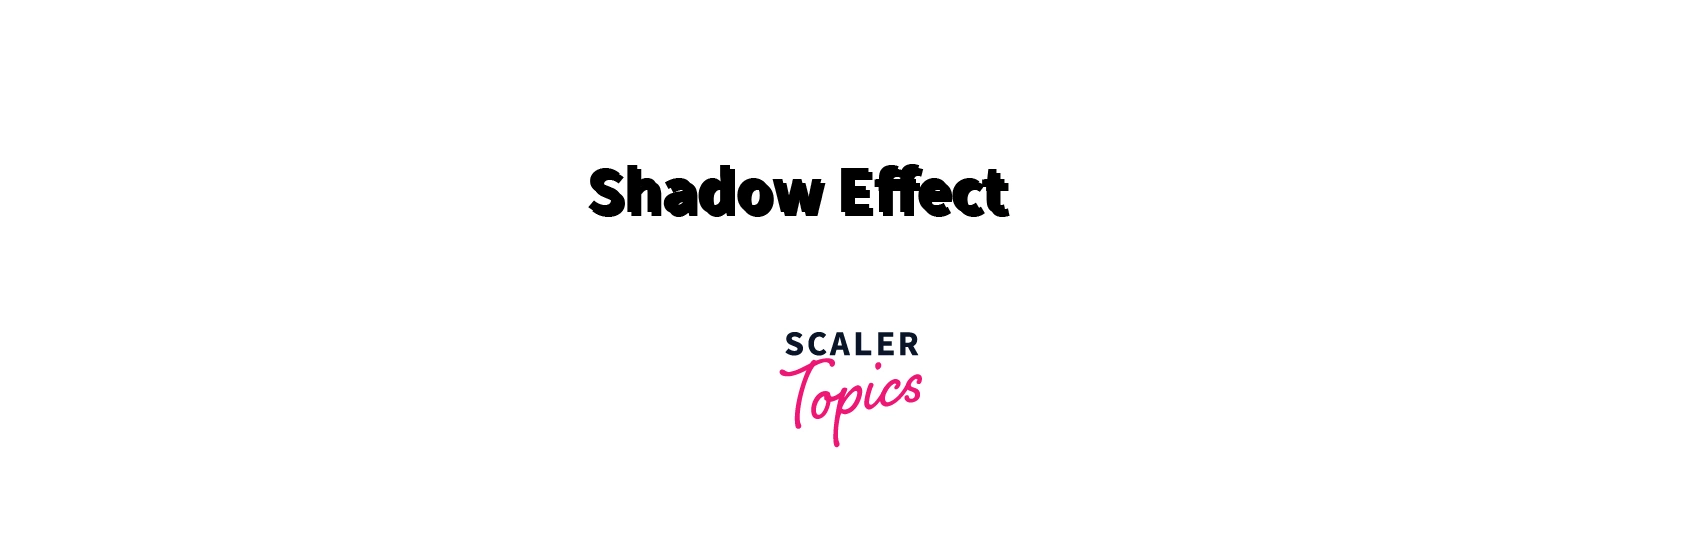 Shadow effect: by updating x and y label only